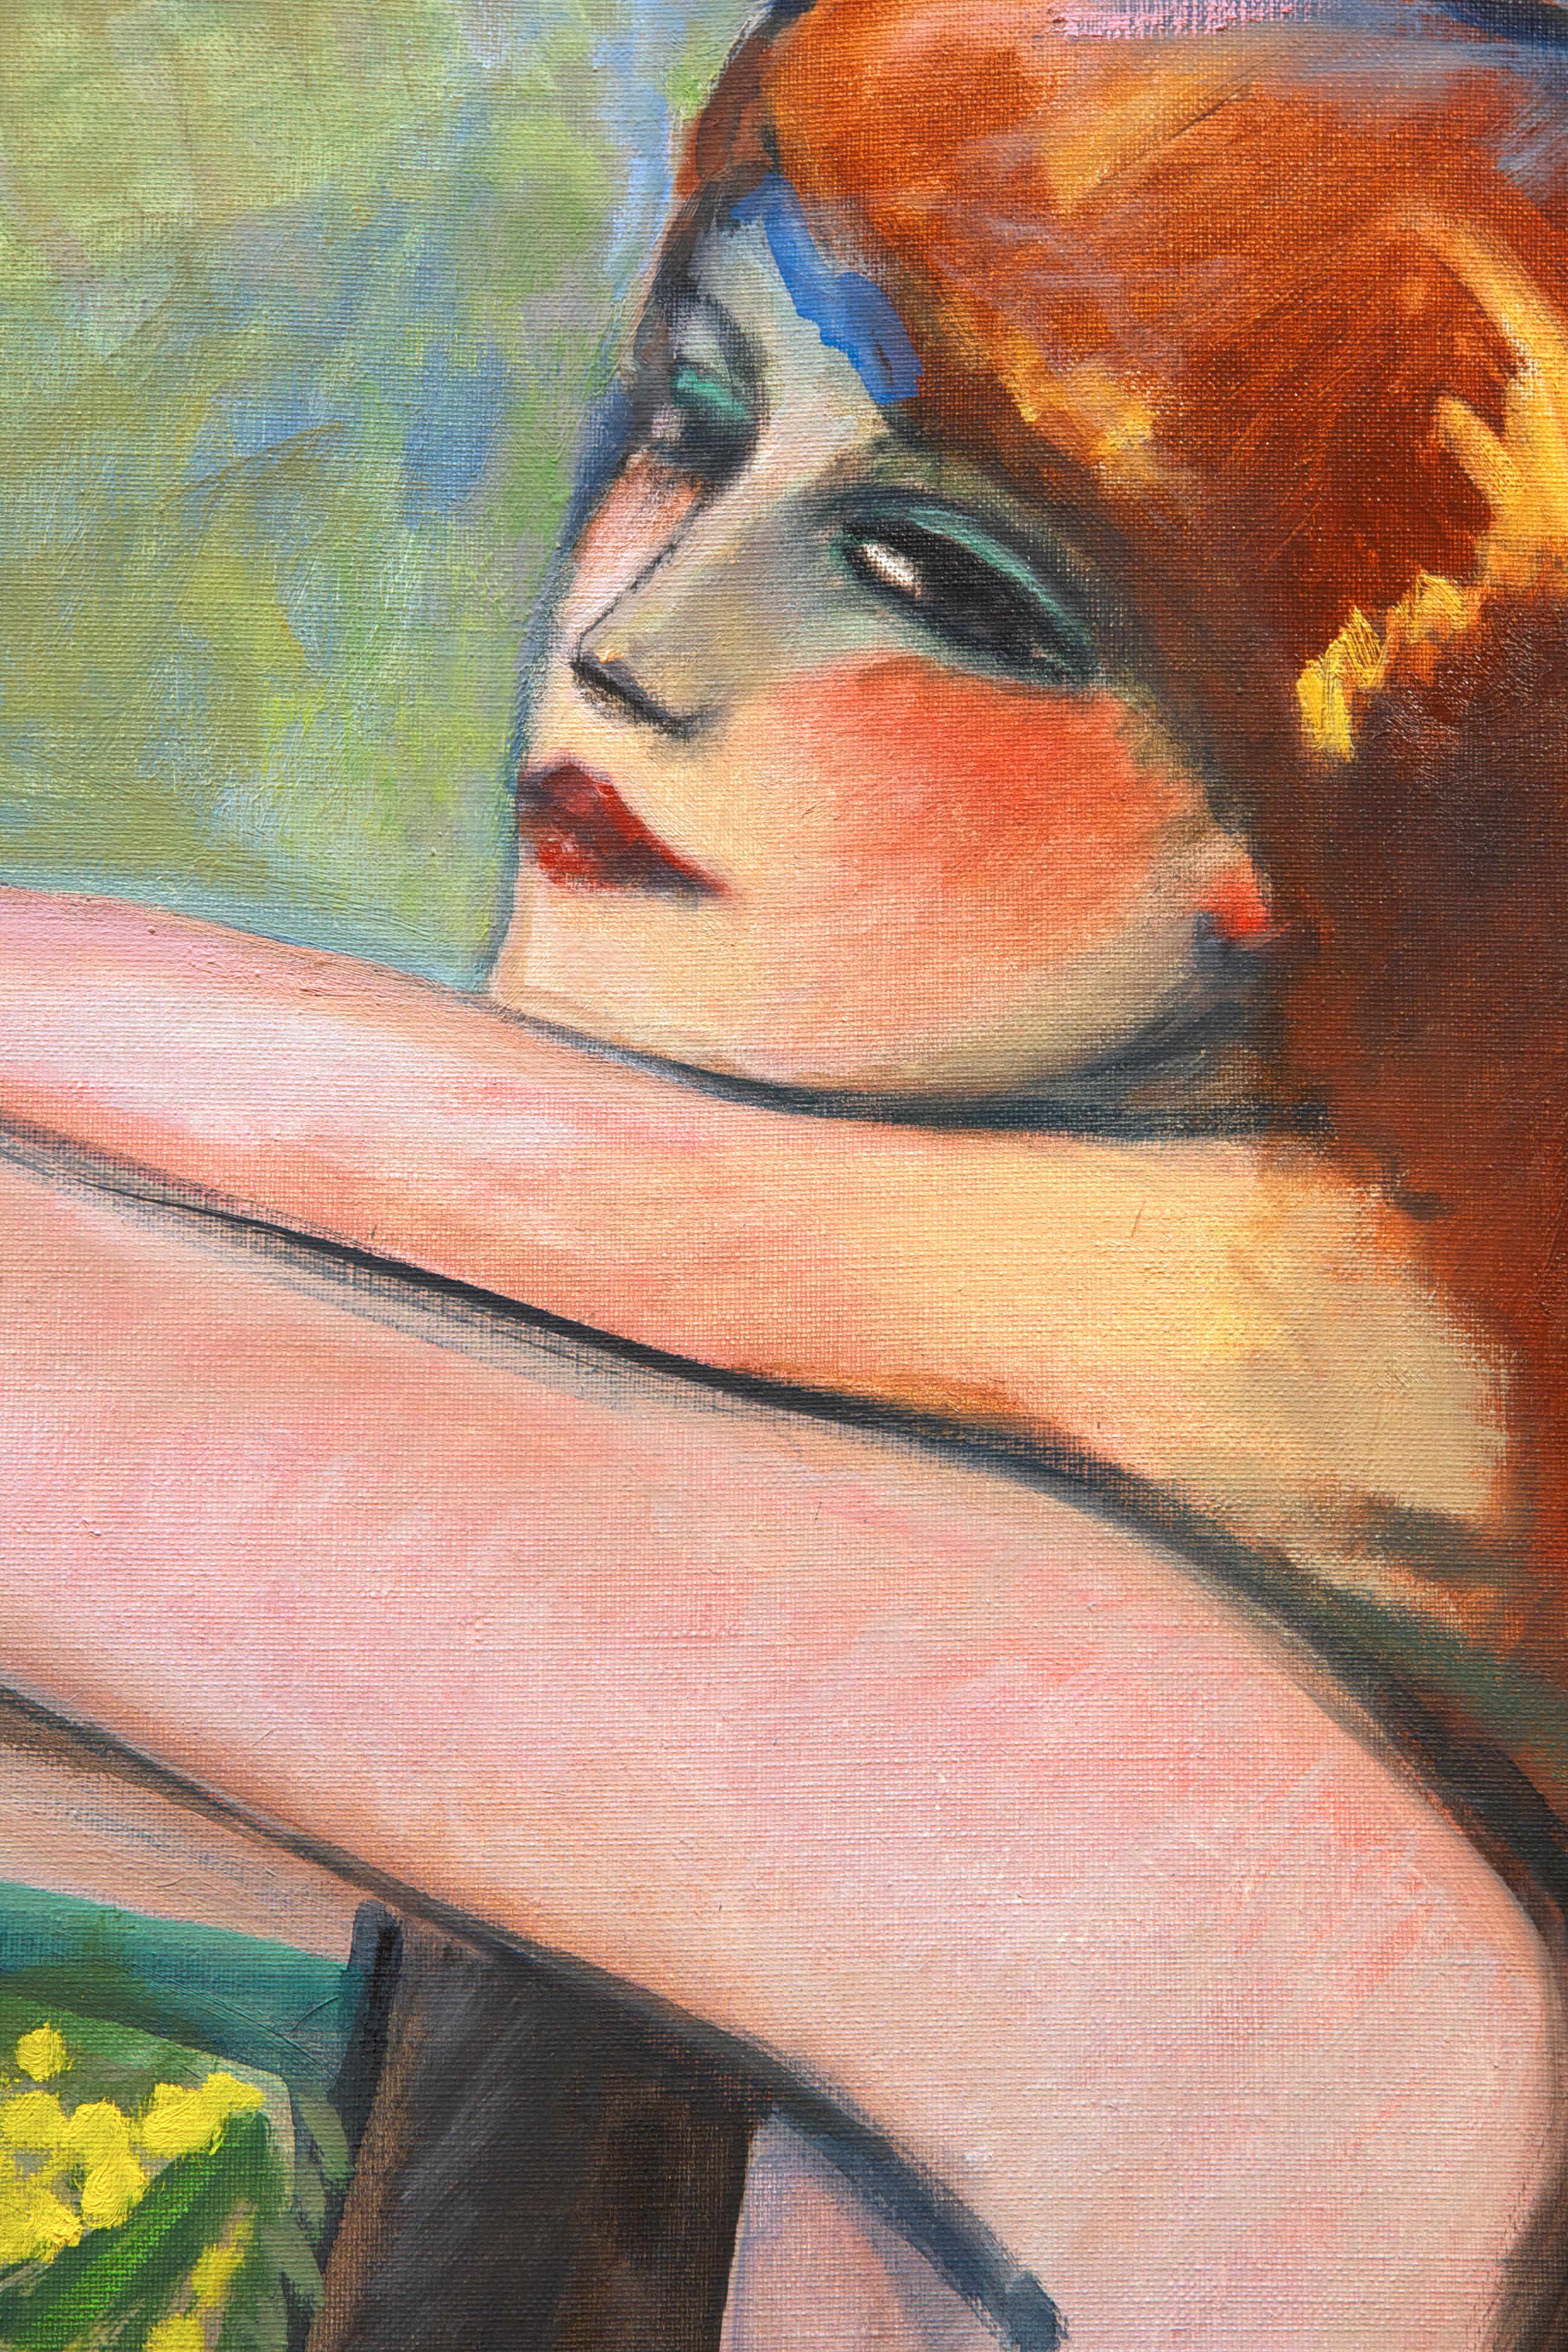 Modern Fauvist Portrait of a Woman by Cassigneul, 